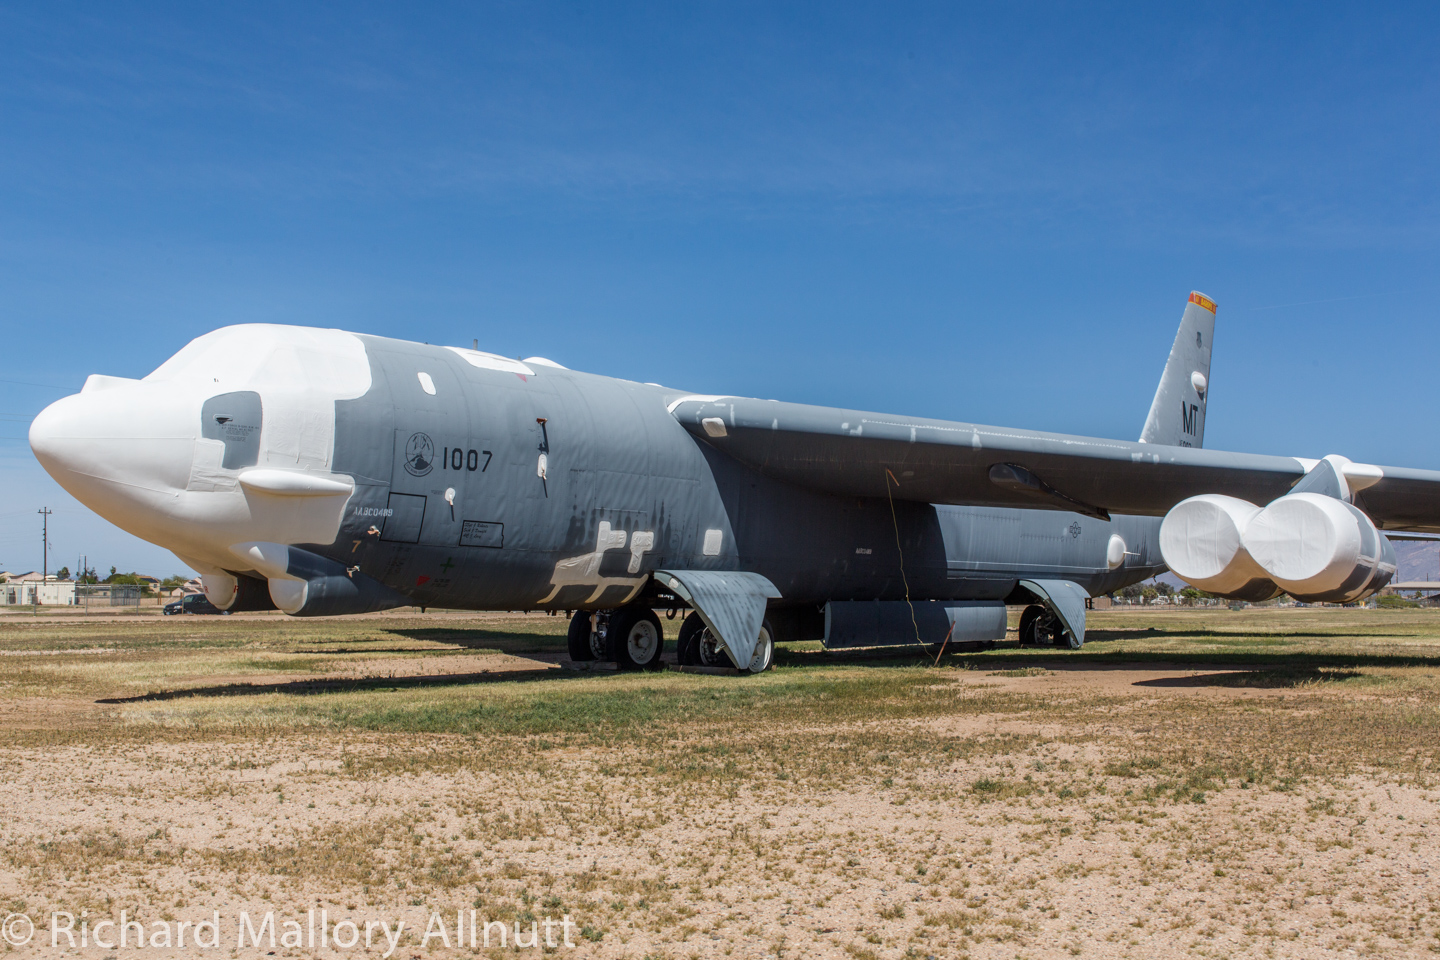 '007 'The Ghost Rider' in storage at AMARG in March, 2014 during a visit by WarbirdsNews. (photo by Richard Mallory Allnutt)